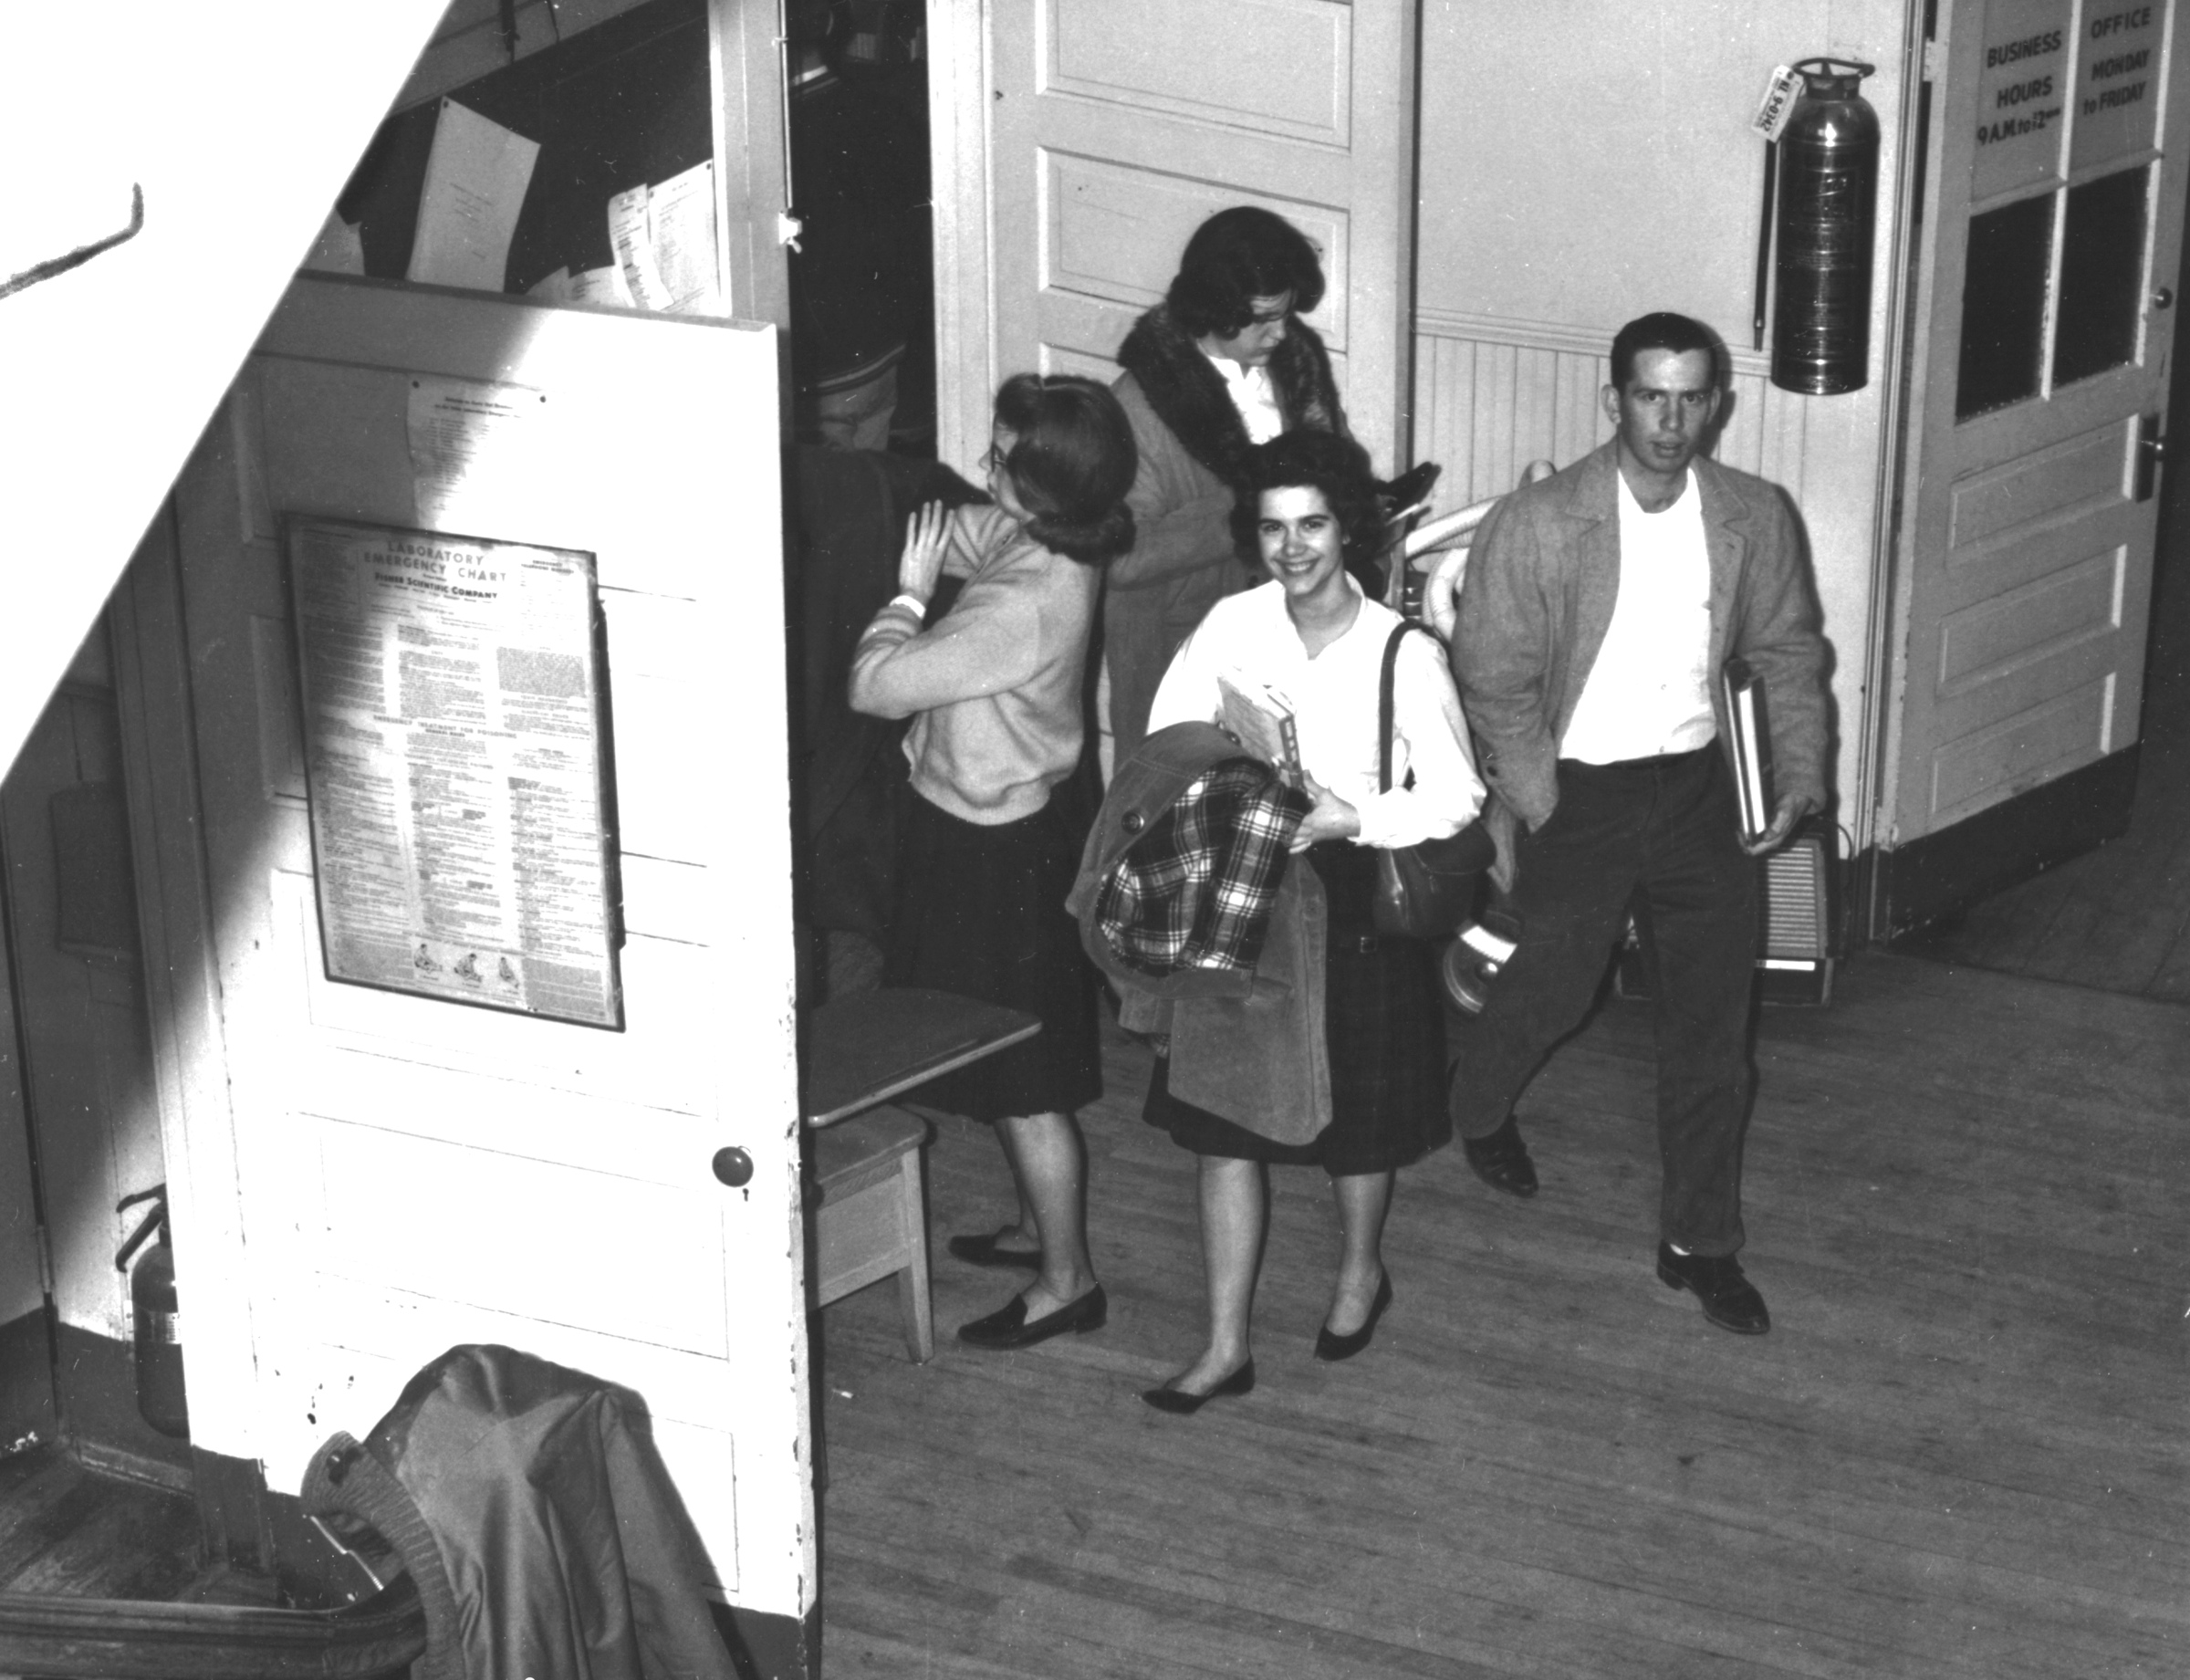 Marianne Torregrossa, Kathy Parnell, Anne Walker, [and] Jim Pracht getting out of 5 o'clock math class, Bailey's Crossroads.  